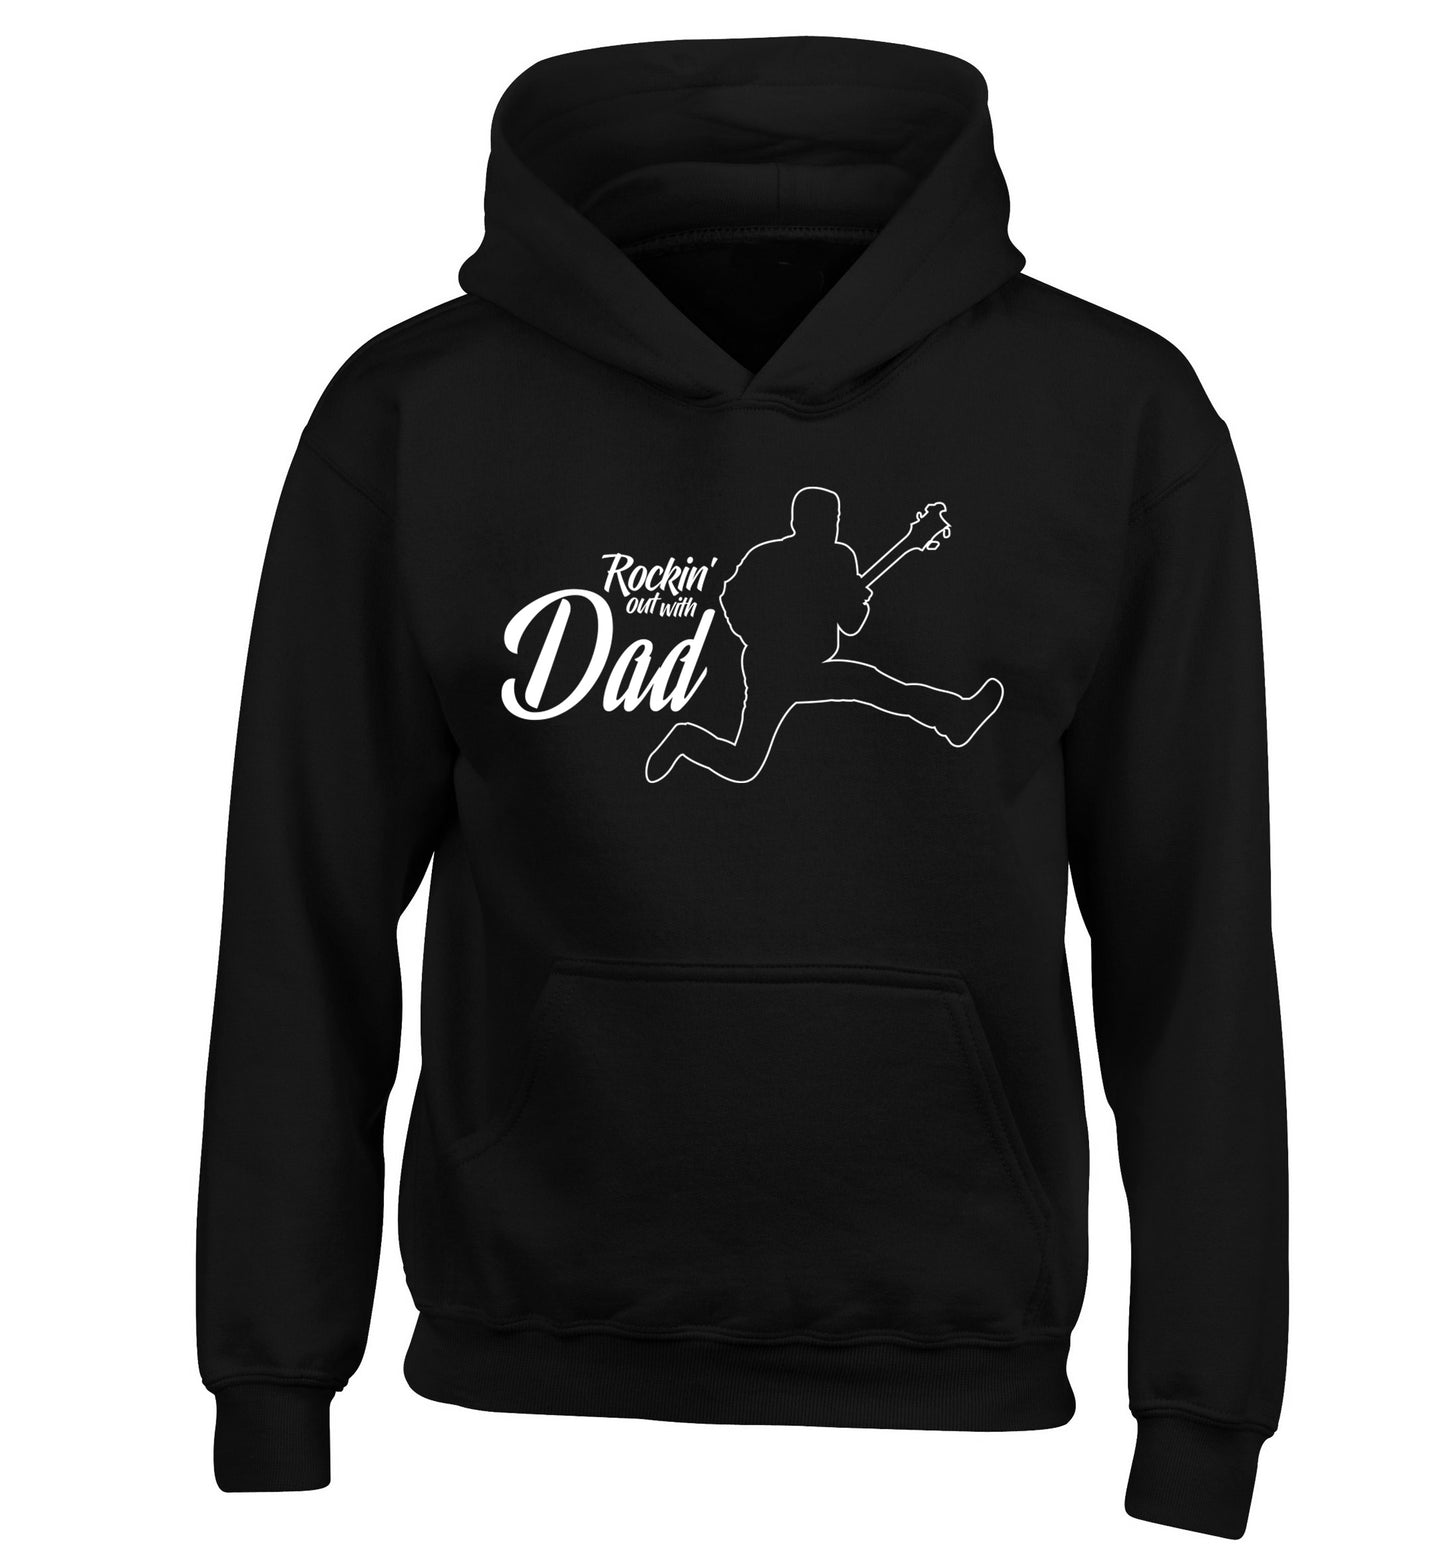 Rockin out with dad children's black hoodie 12-13 Years